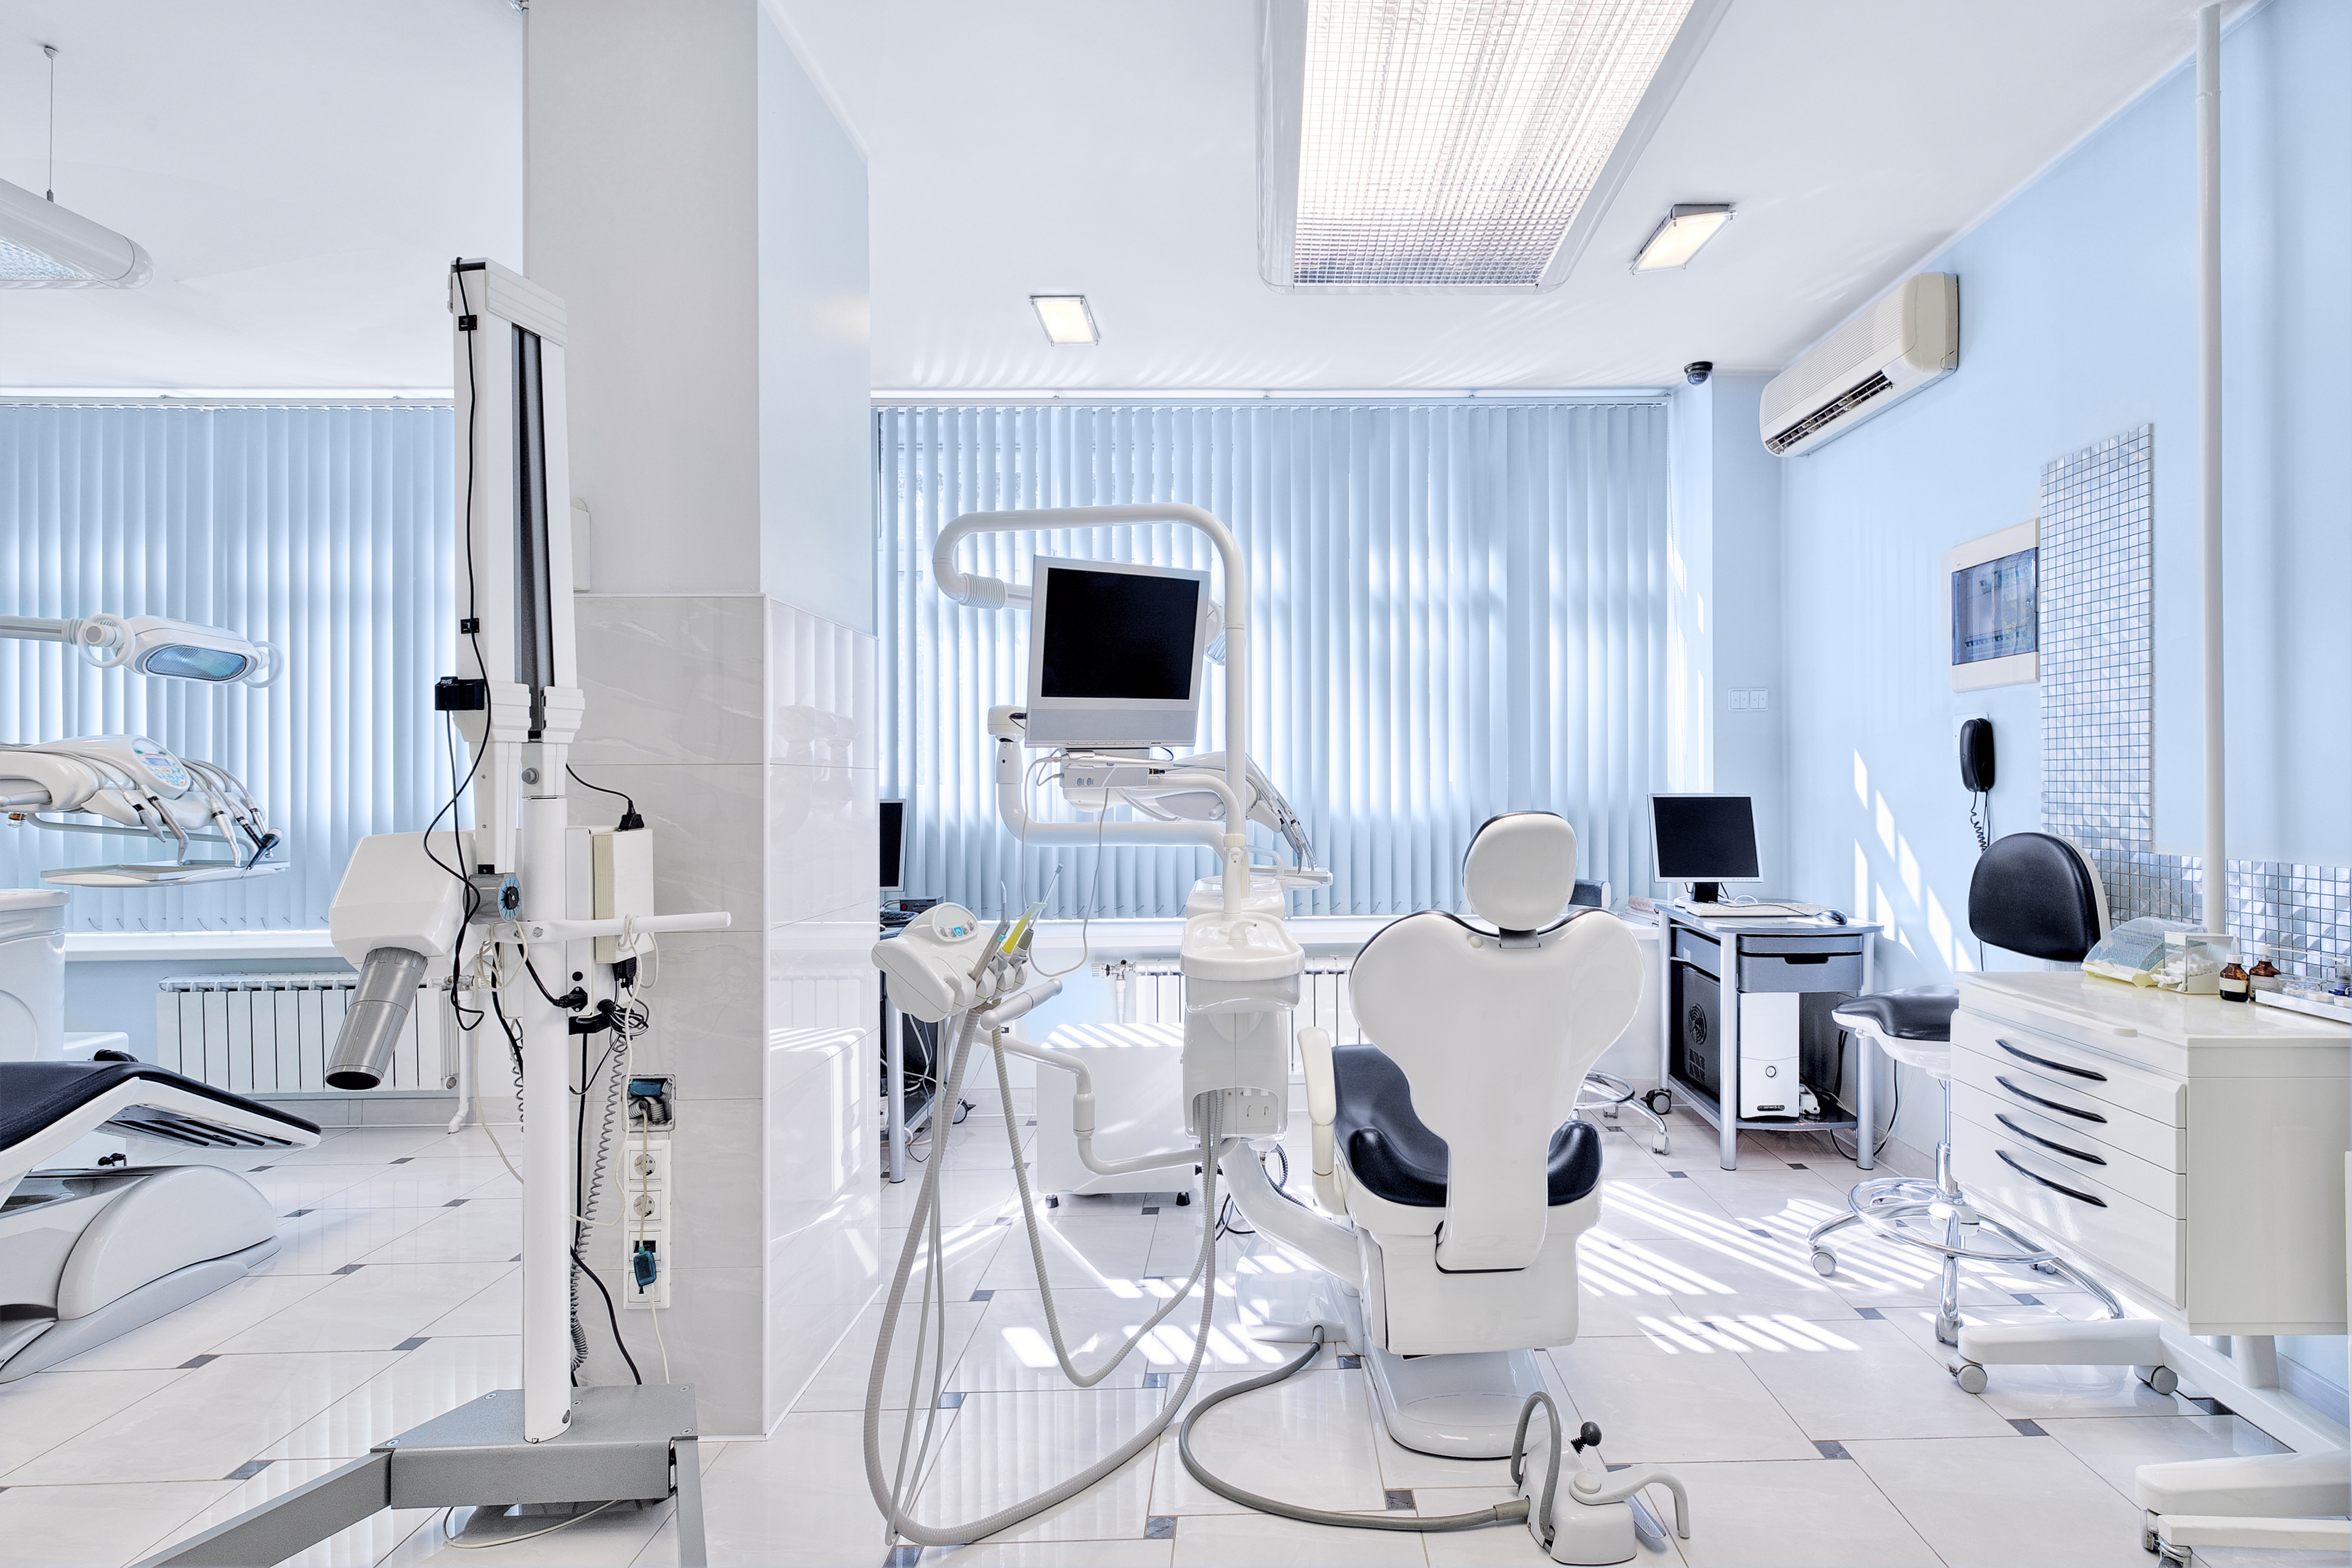 PARTNER POST: What you need to know about buying a dental practice | Credabl